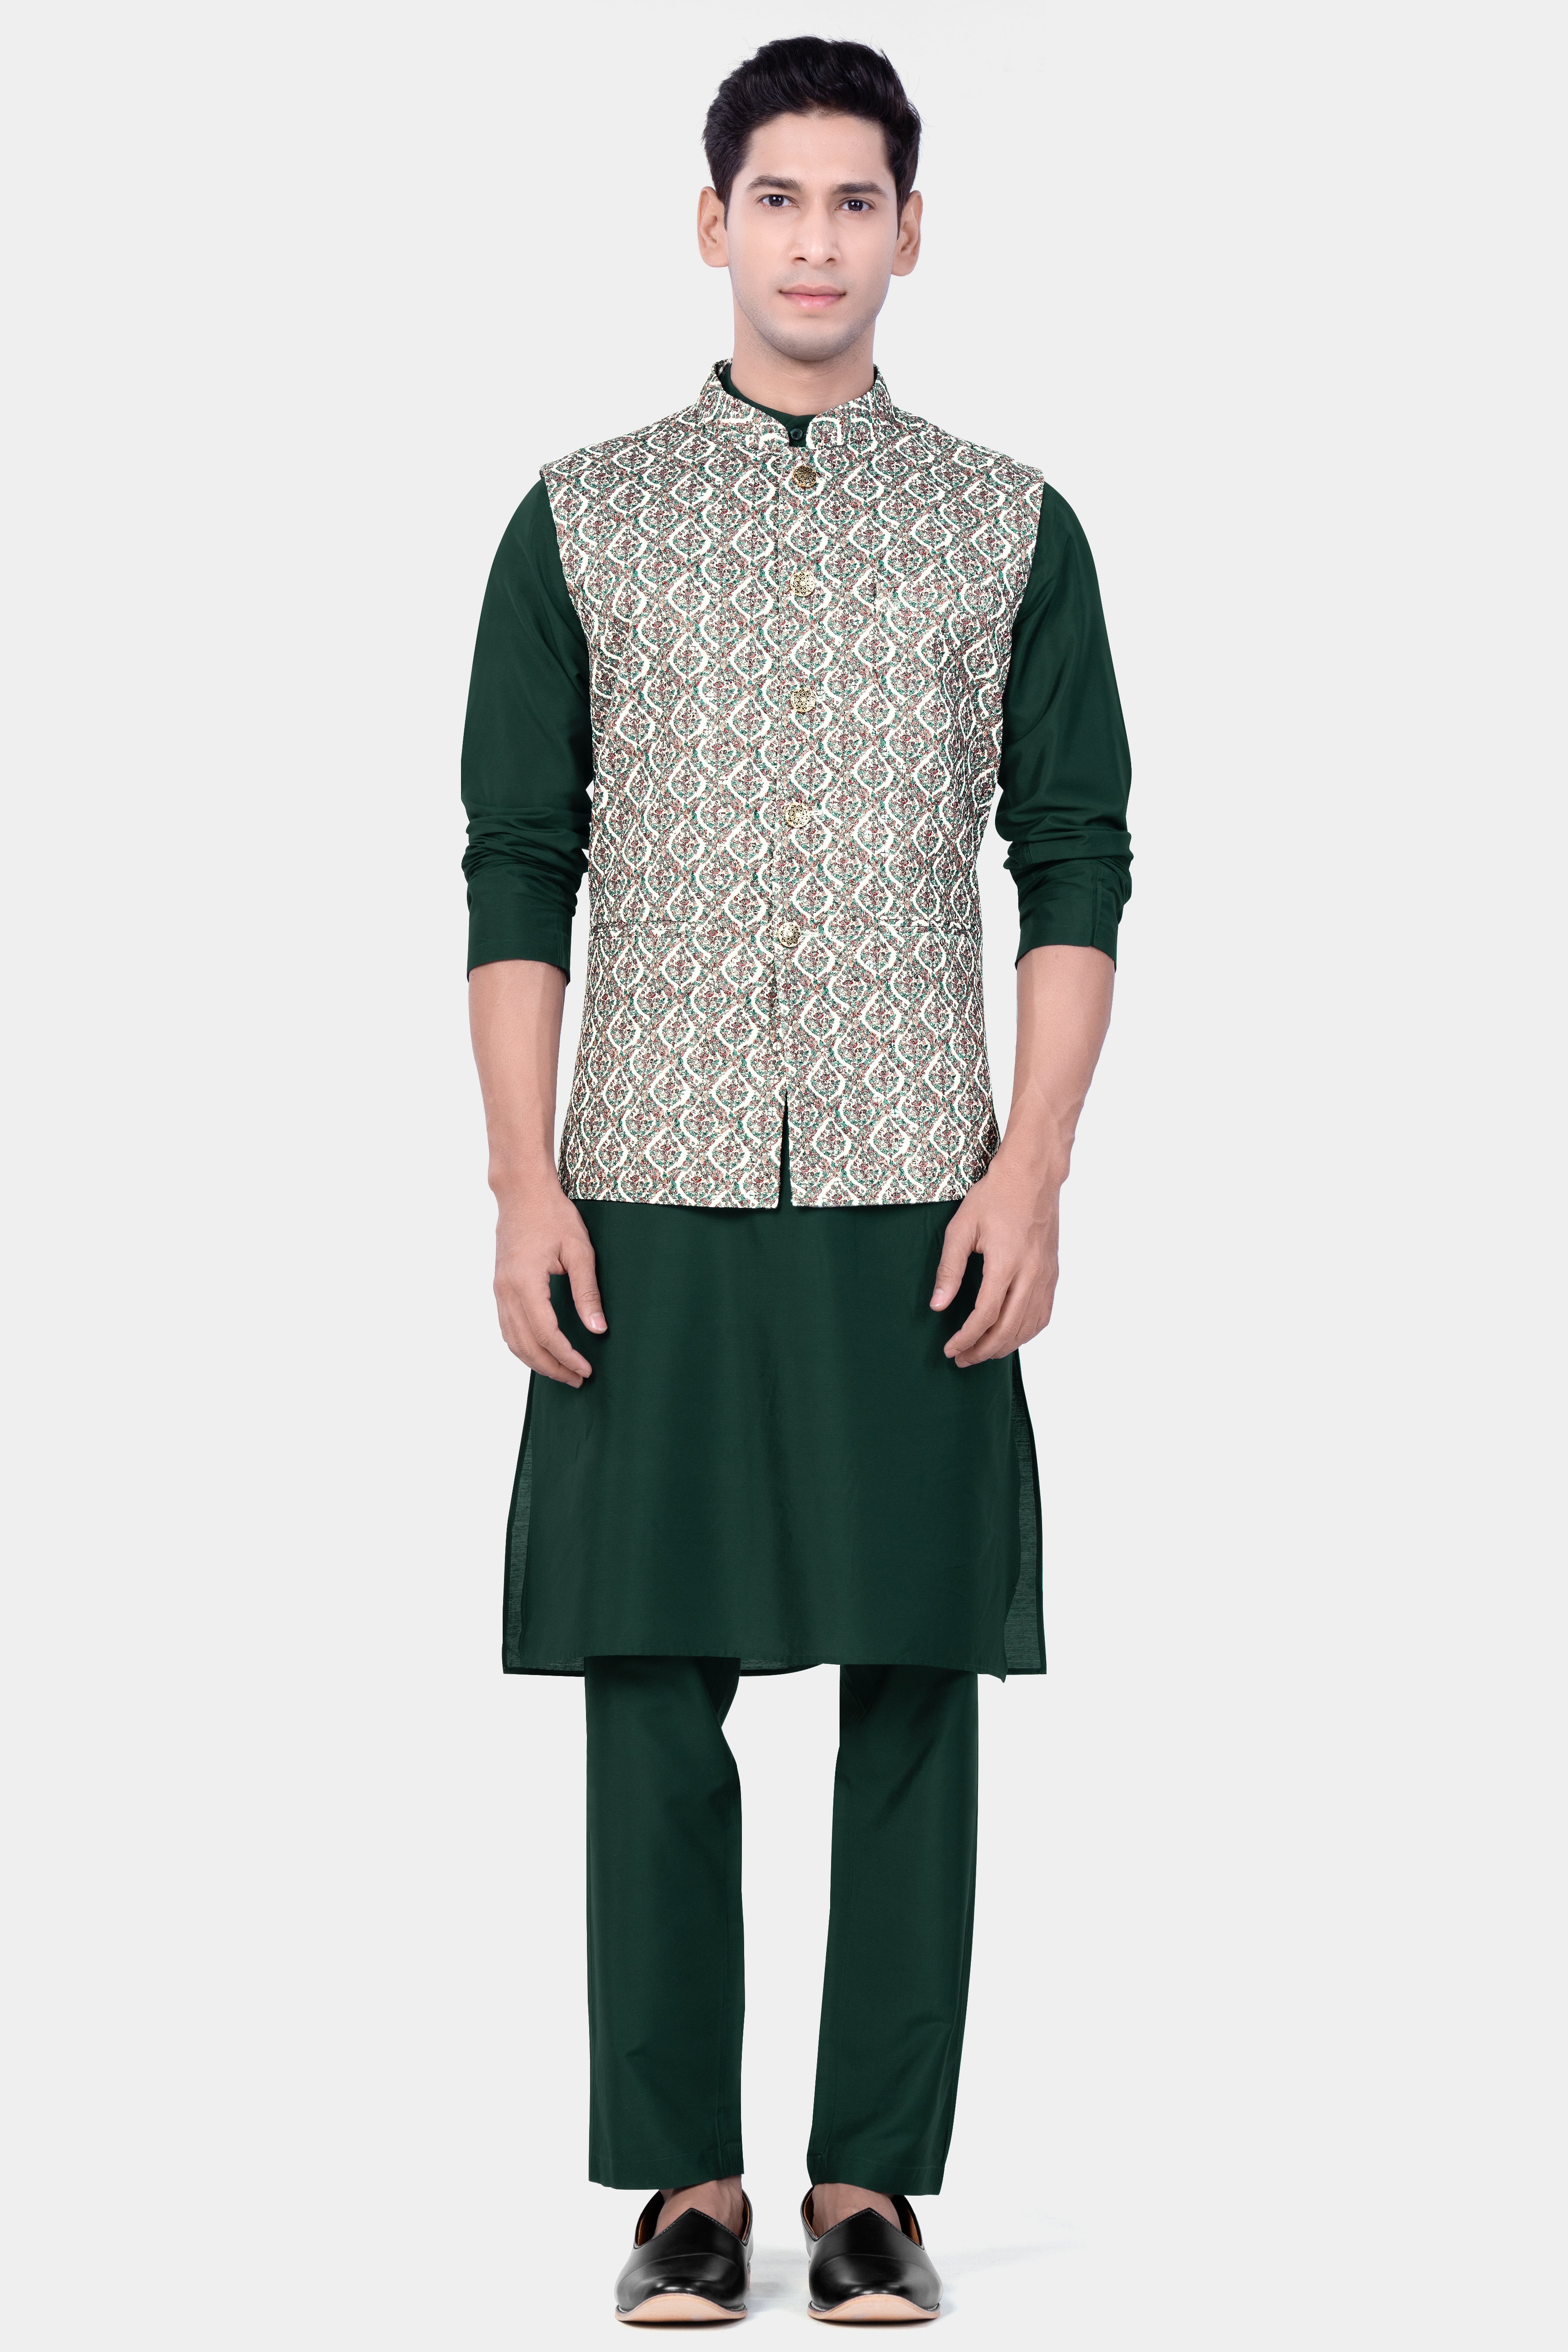 Bright White And Patina Green MultiColour Designer Embroidered Nehru Jacket